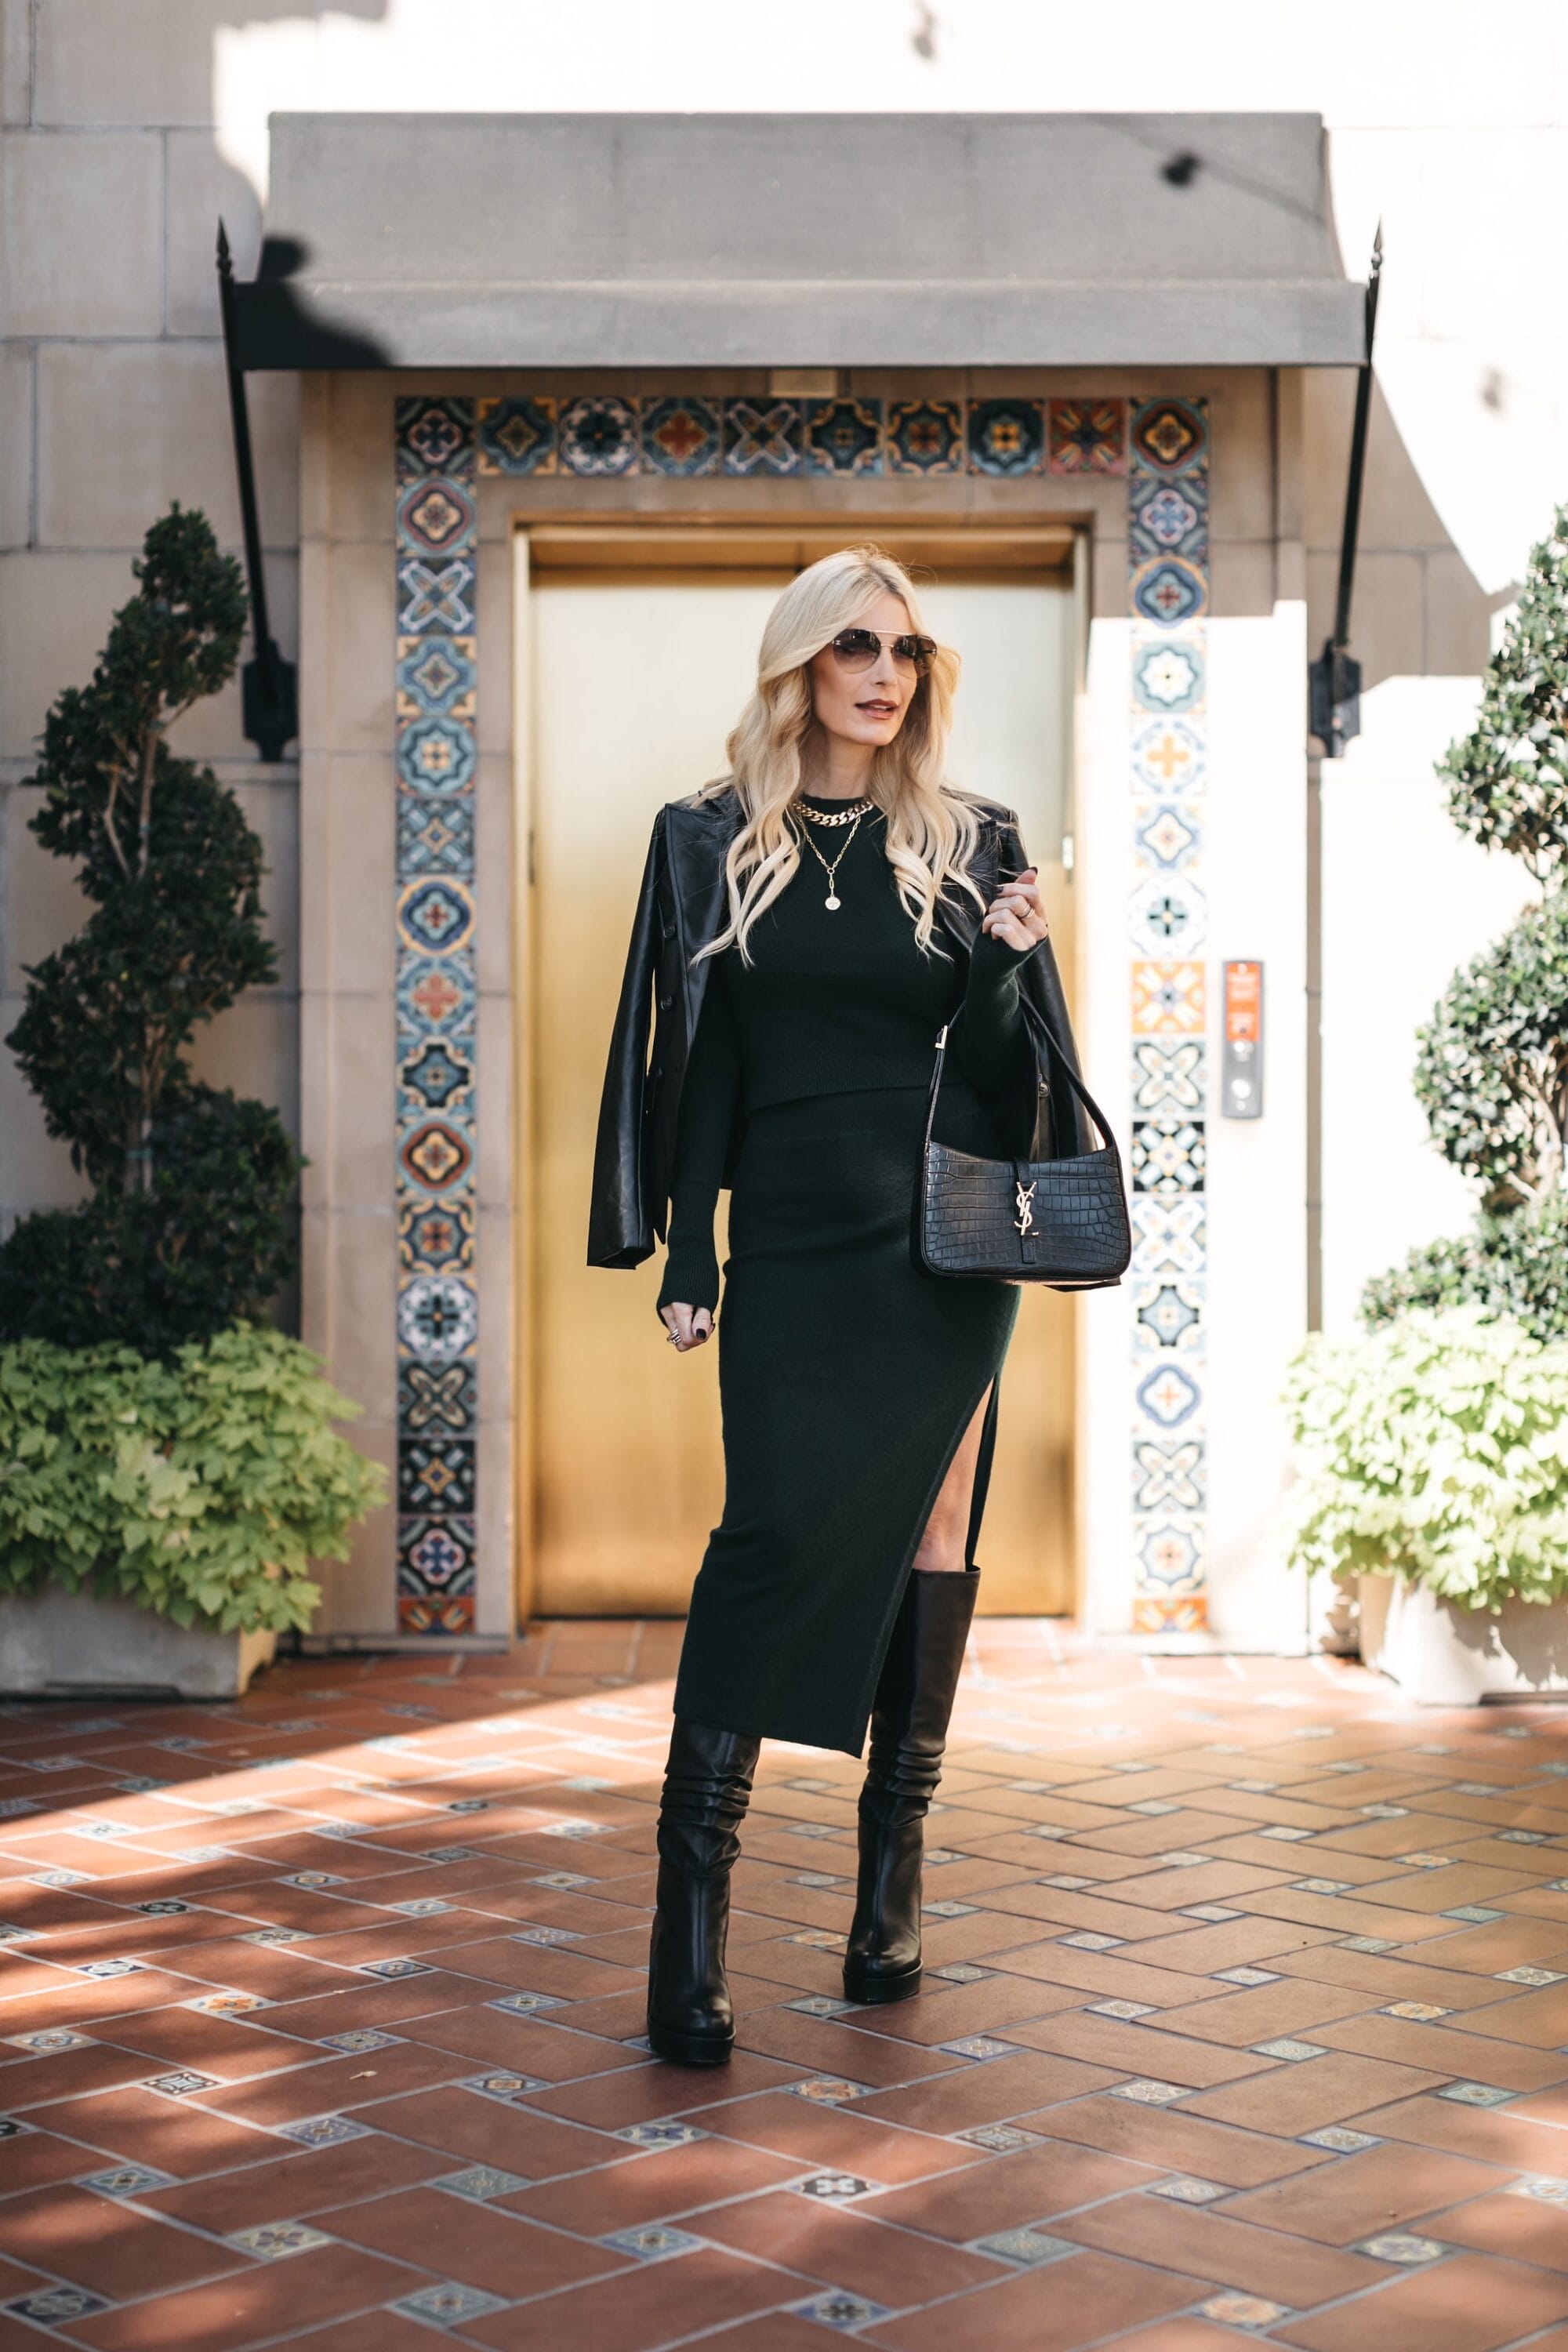 Over 40 dallas fashion blogger wearing cashmere sweater set with black faux blazer schuts knee-high boots.